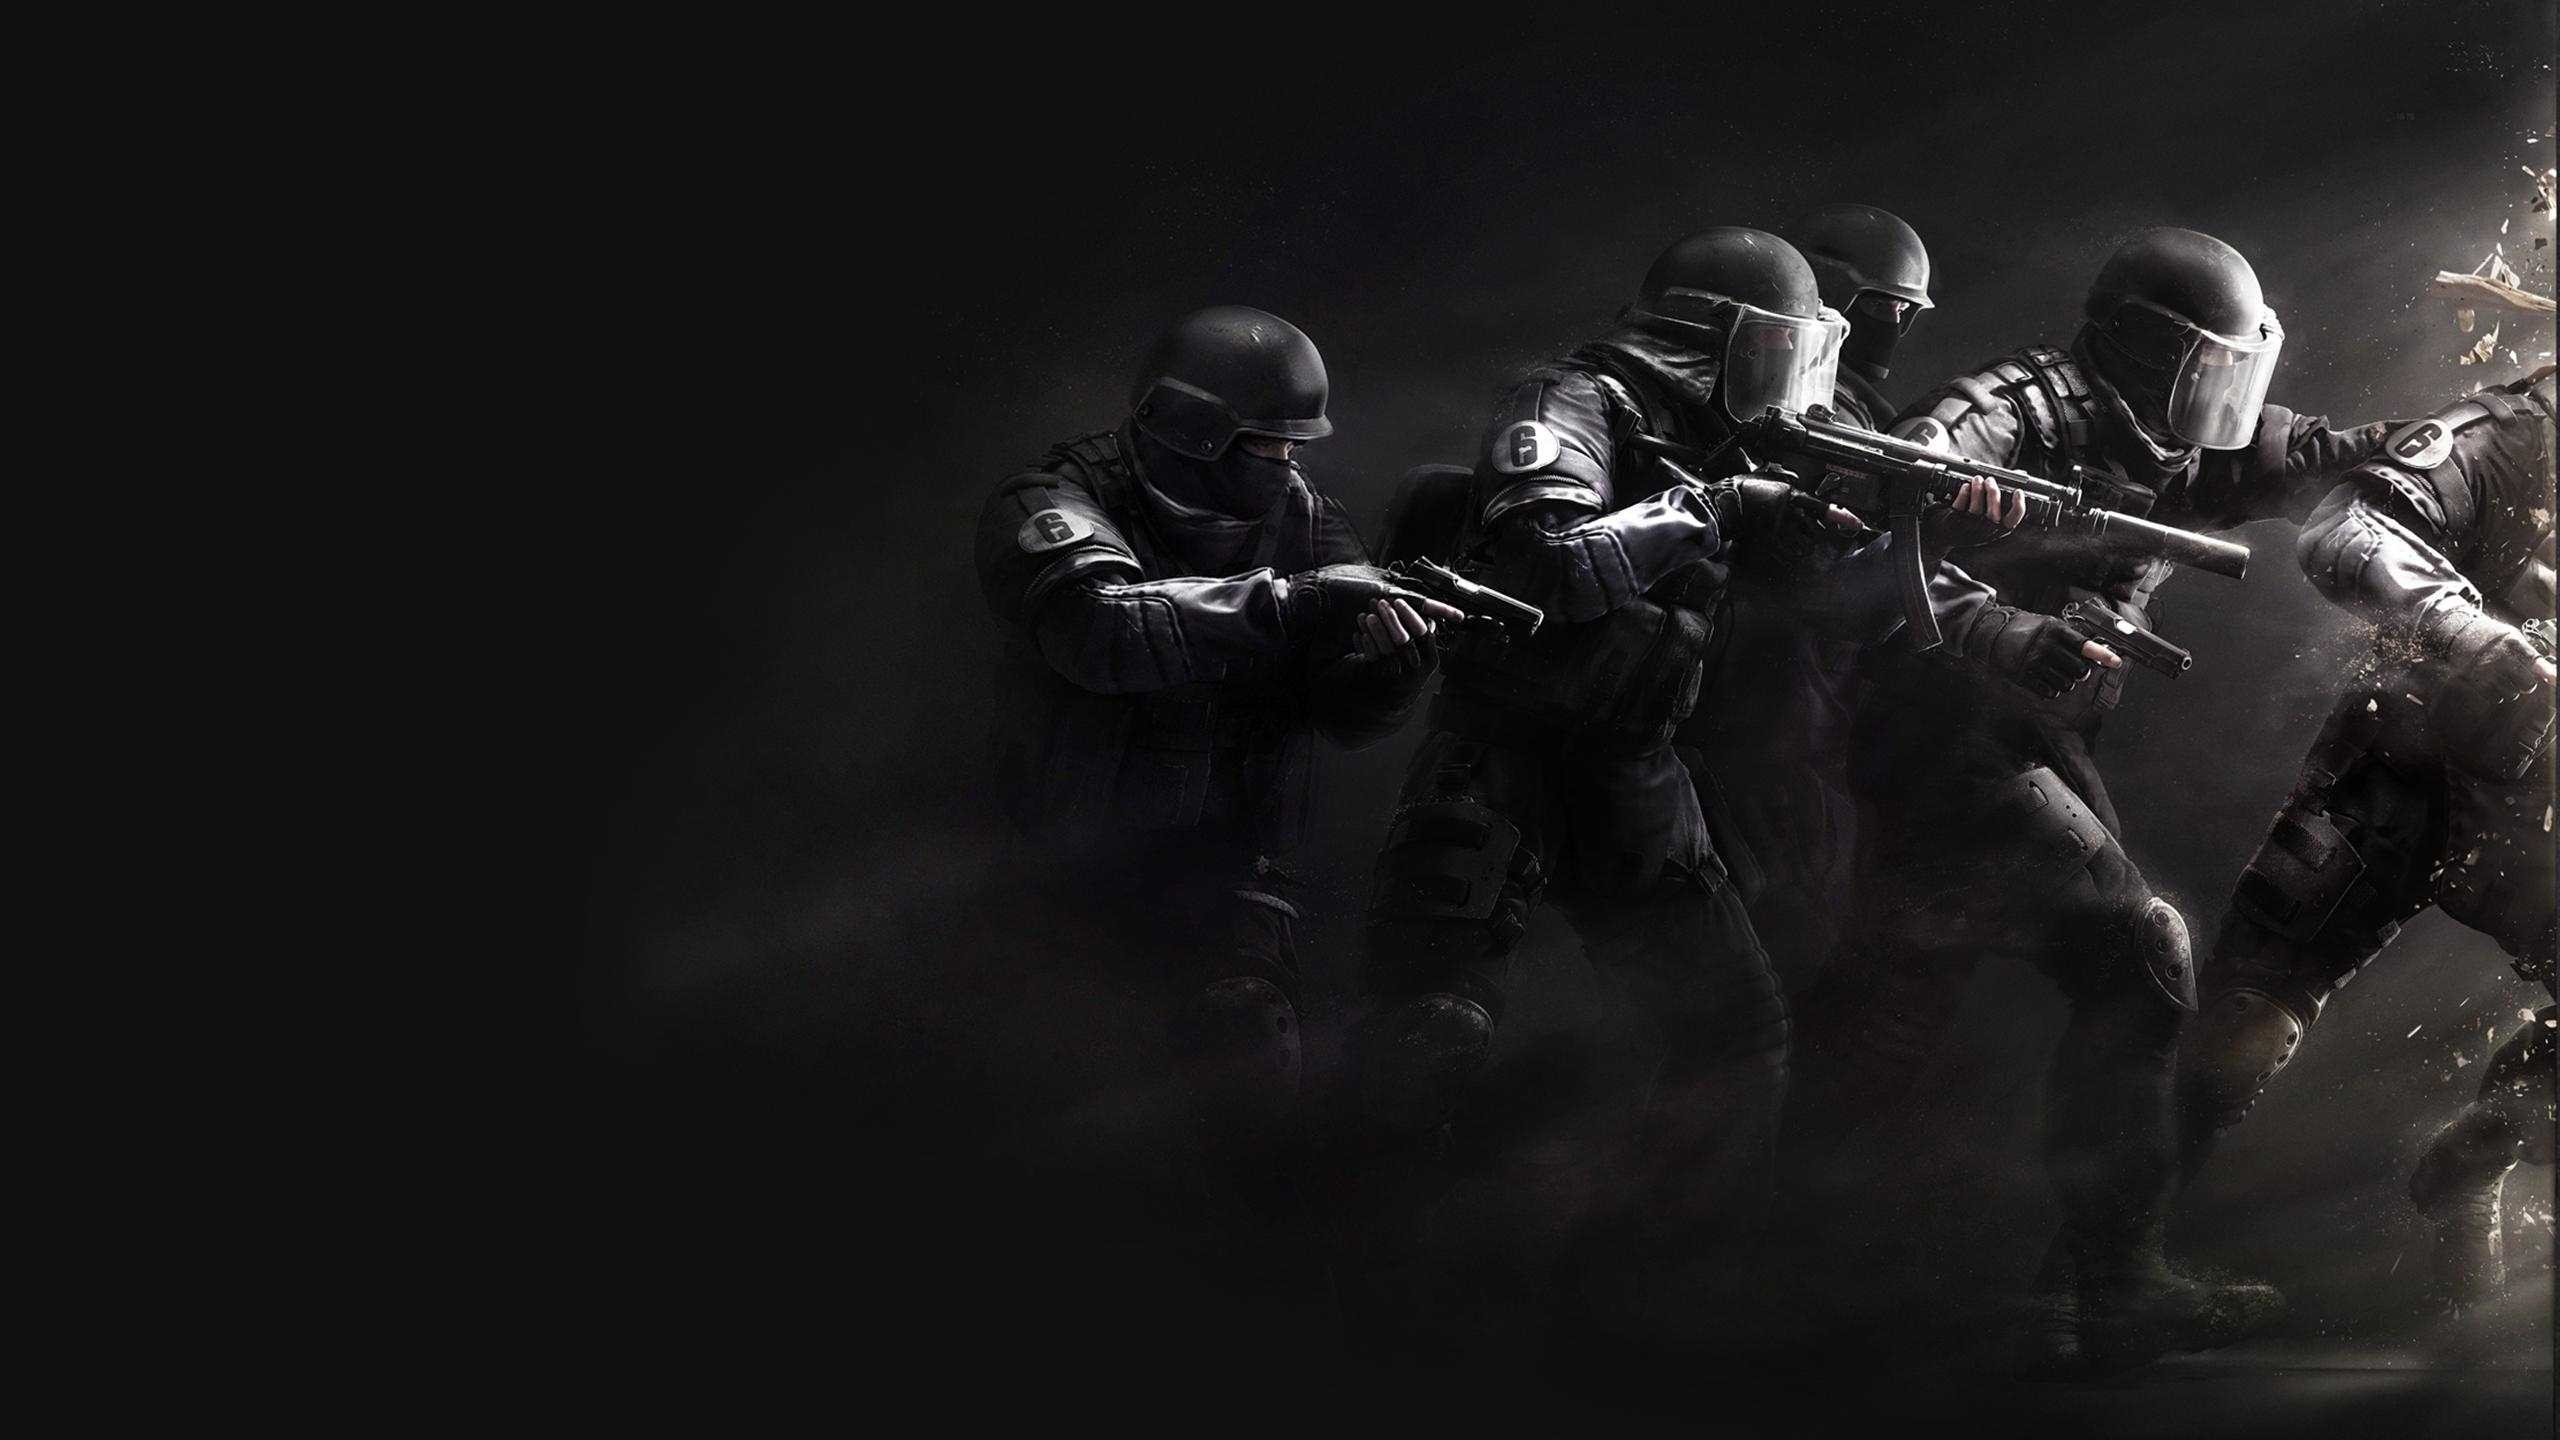 2560x1440 Rainbow Six Siege Wallpapers Group with 58 items